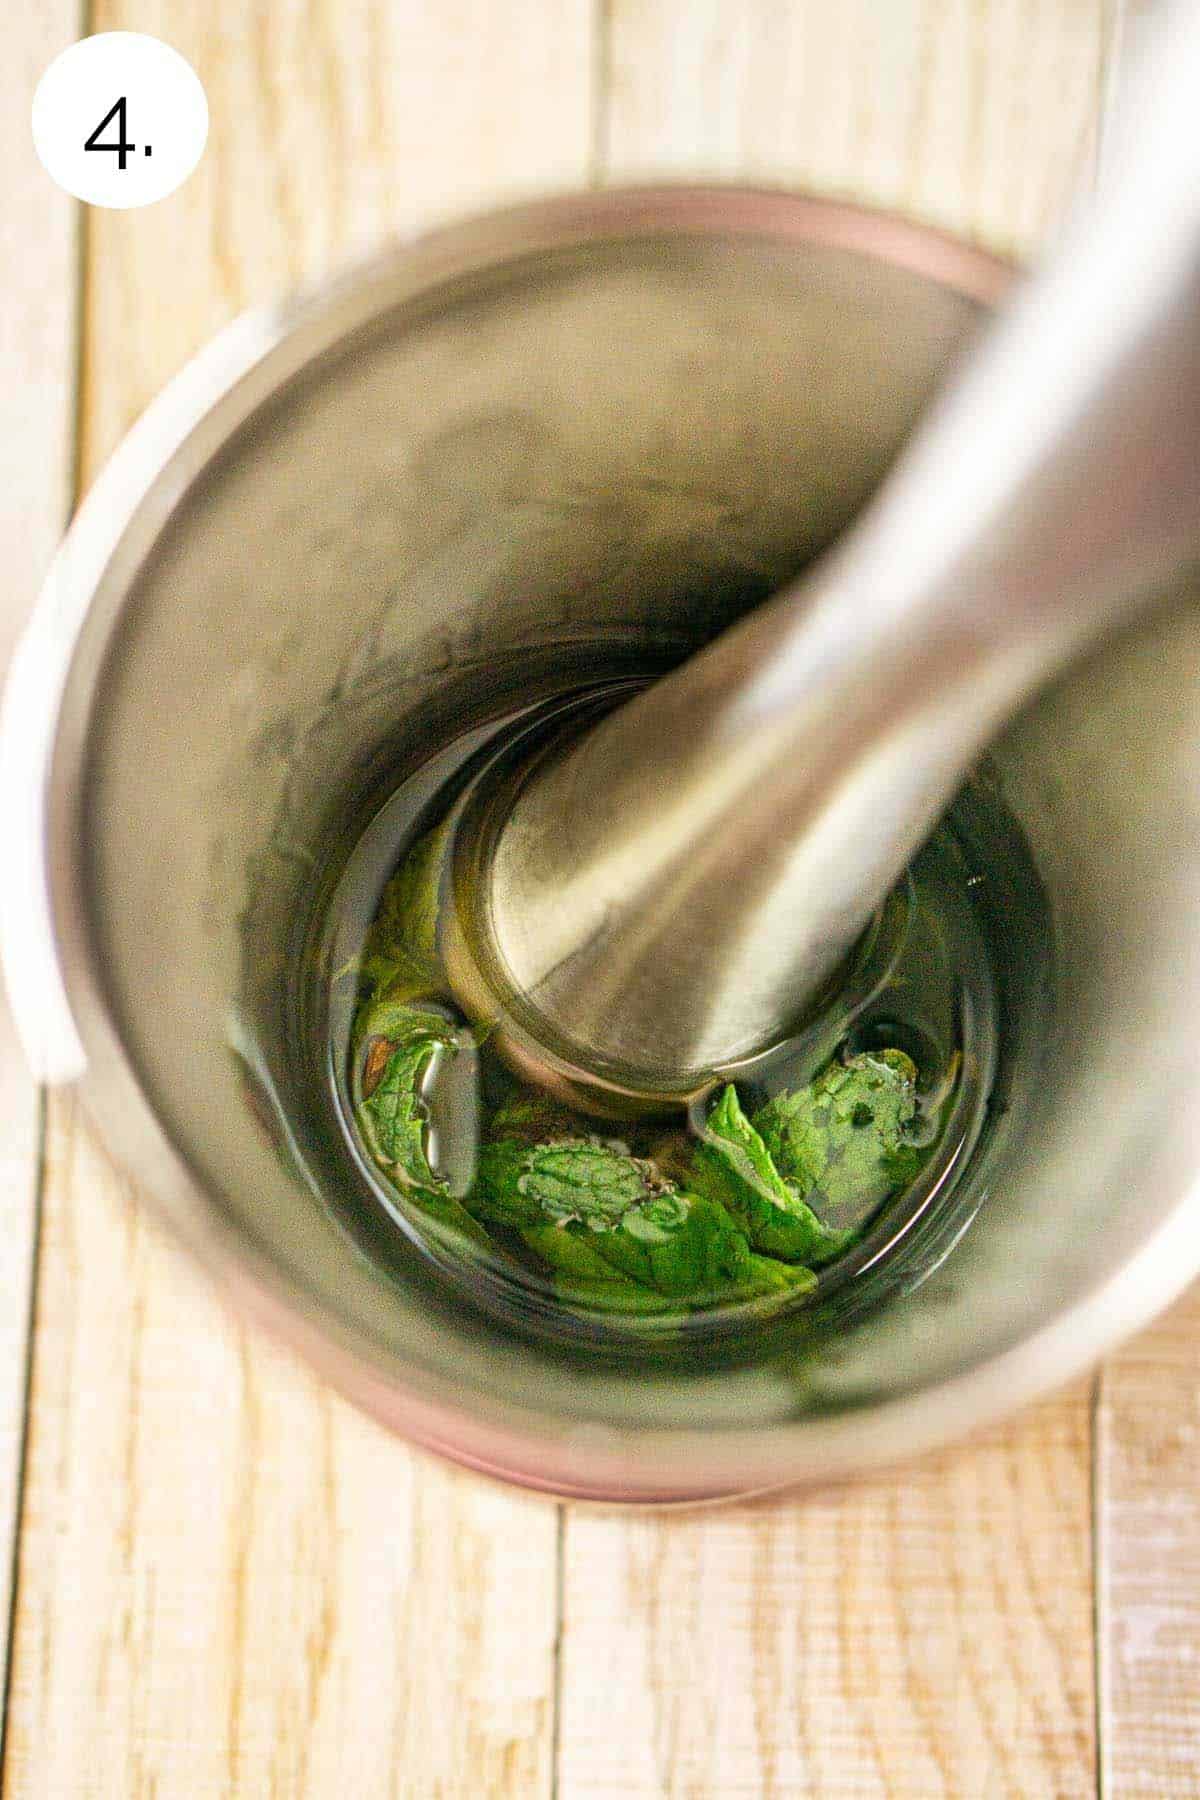 Muddling the bourbon and mint leaves in a silver pewter glass on a wooden surface.